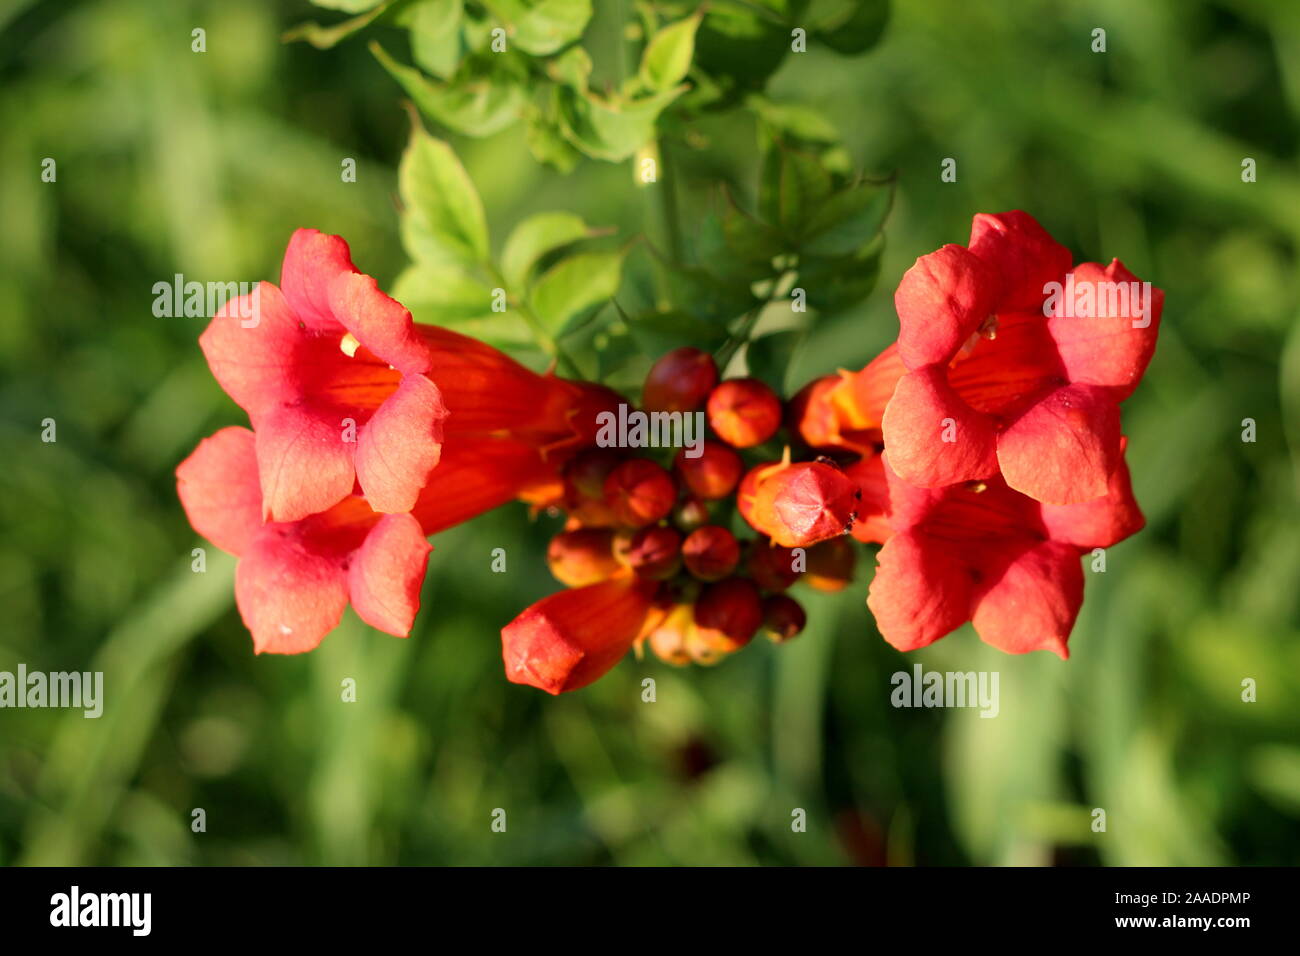 Single branch of Trumpet vine or Campsis radicans or Trumpet creeper or Cow itch vine or Hummingbird vine flowering deciduous woody vine plant Stock Photo